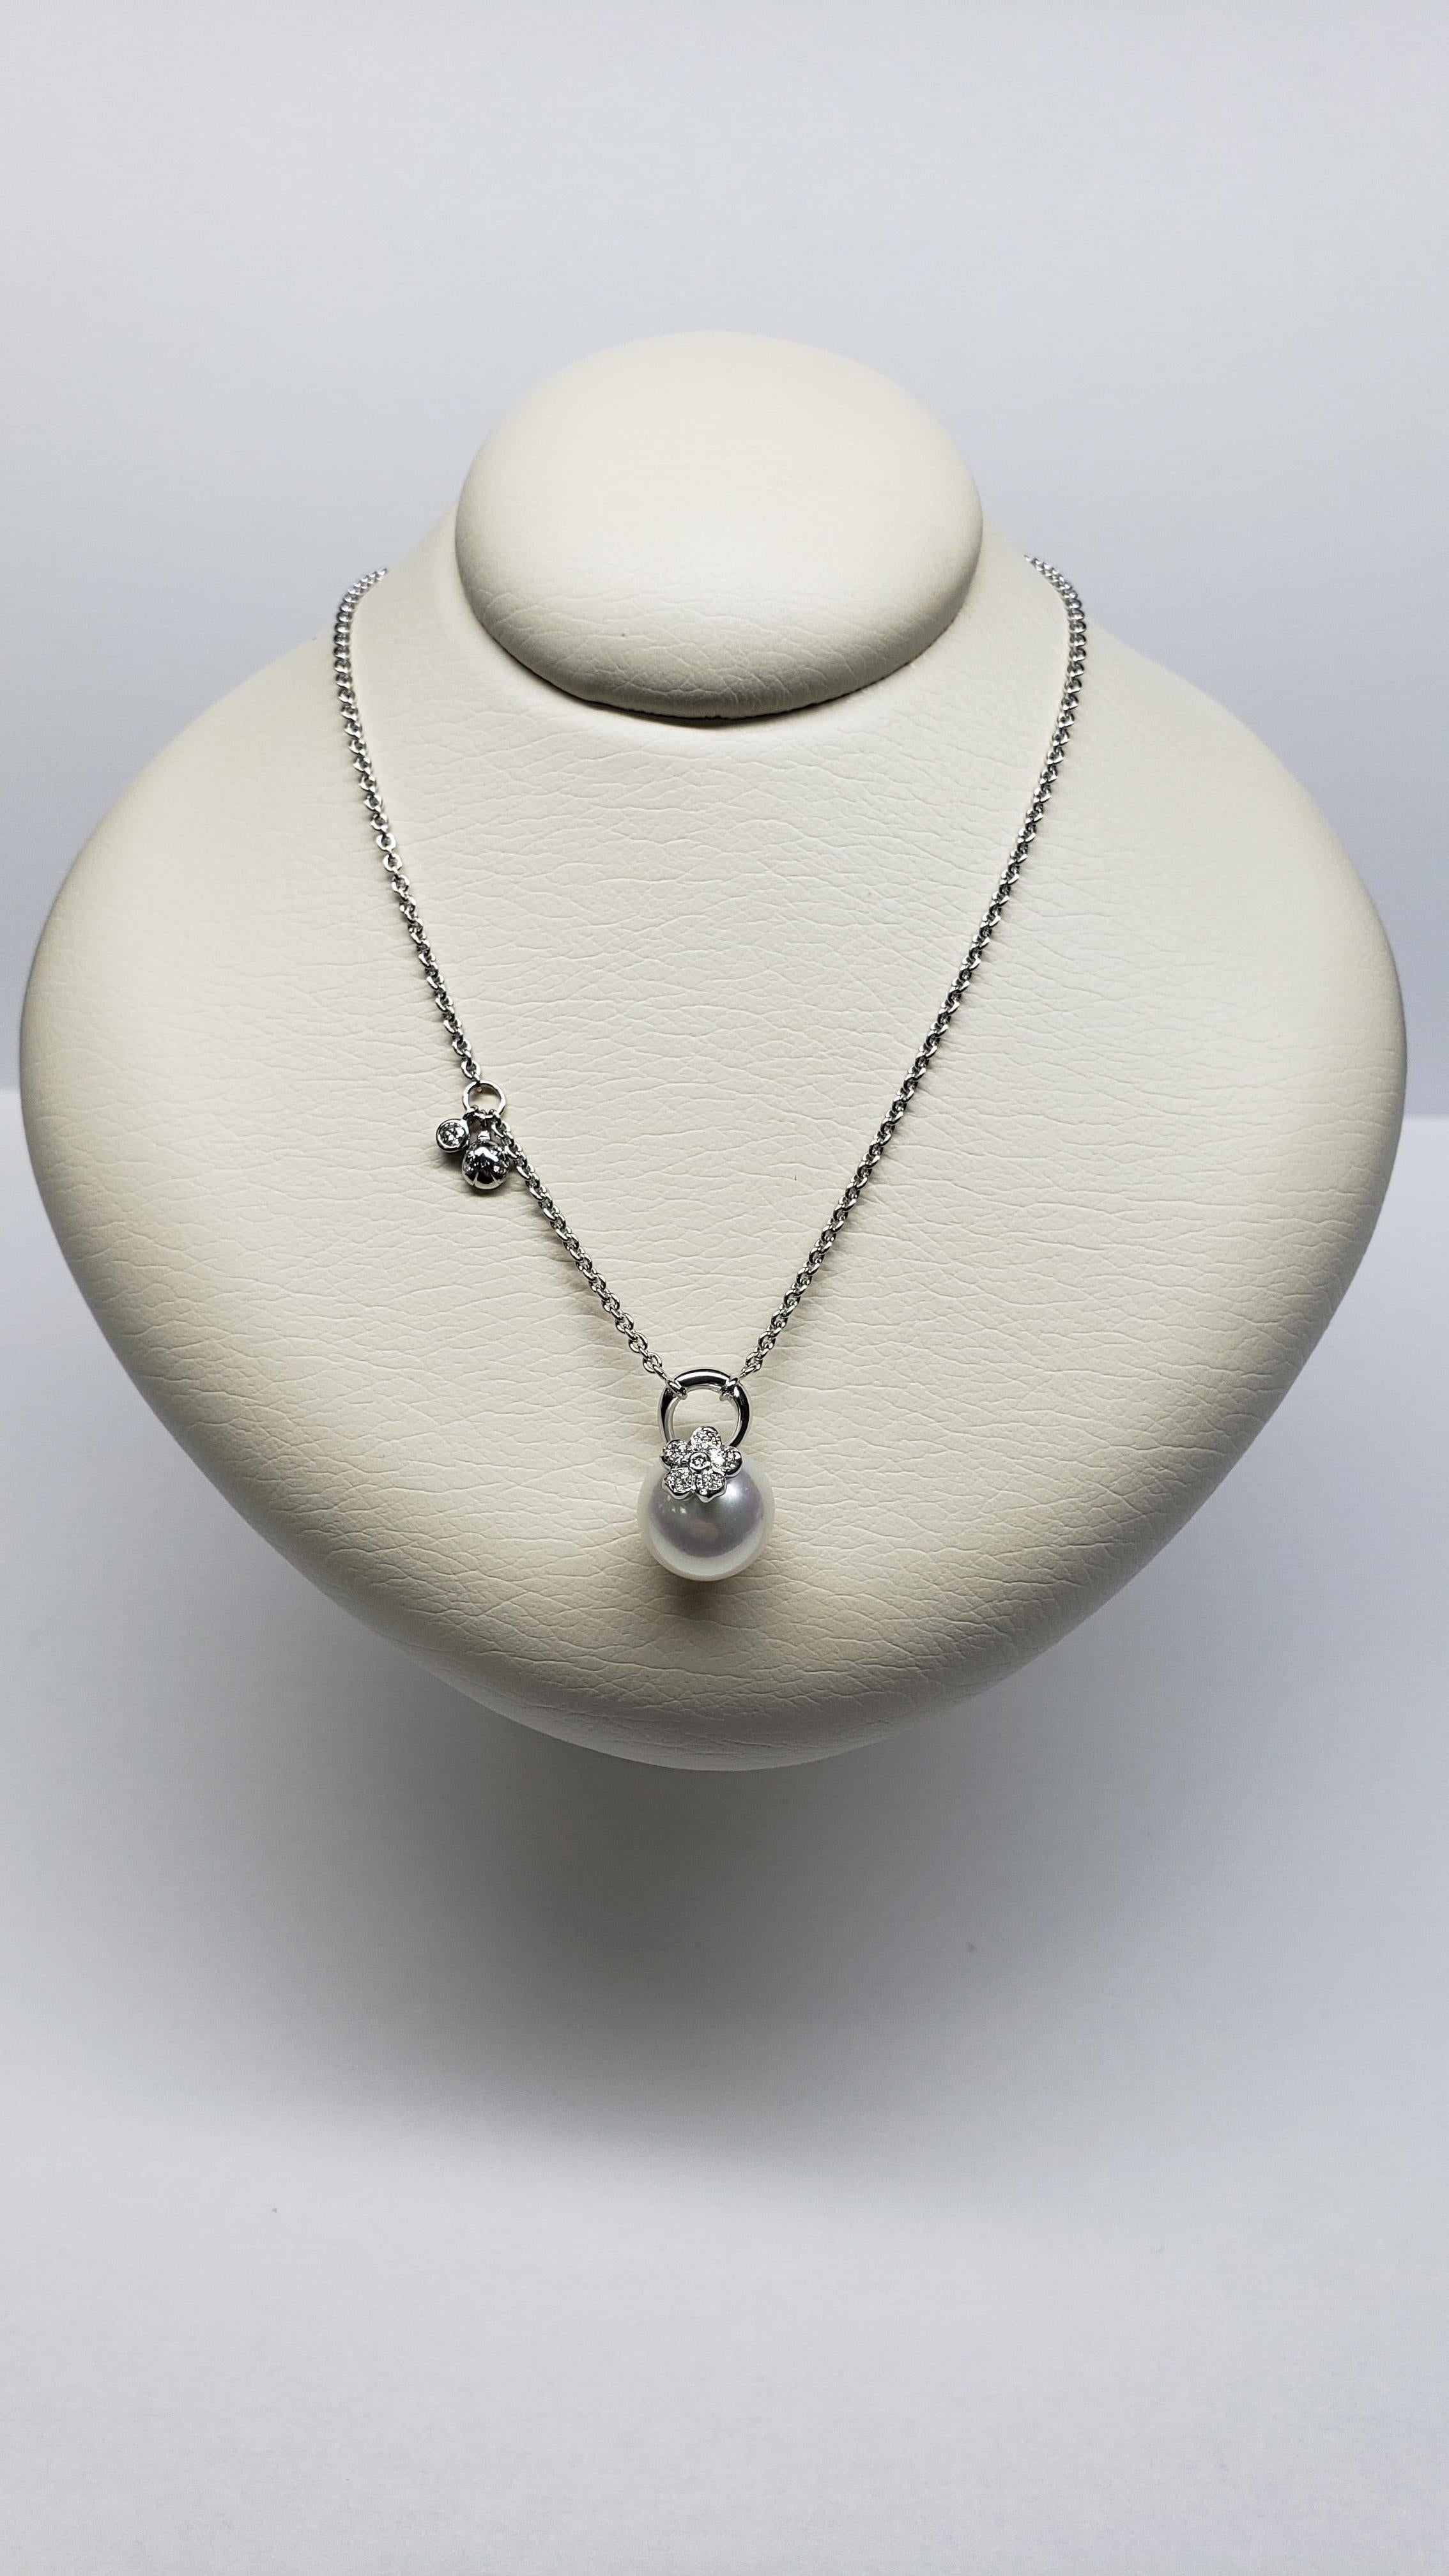 This Mikimoto, 18K, White Gold, 11mm, White South Sea Pearl, Flower Pendant features an A+ quality, cultured south sea pearl. It is adorned with an 18K white gold and diamond flower designed bale. Attached is a 16